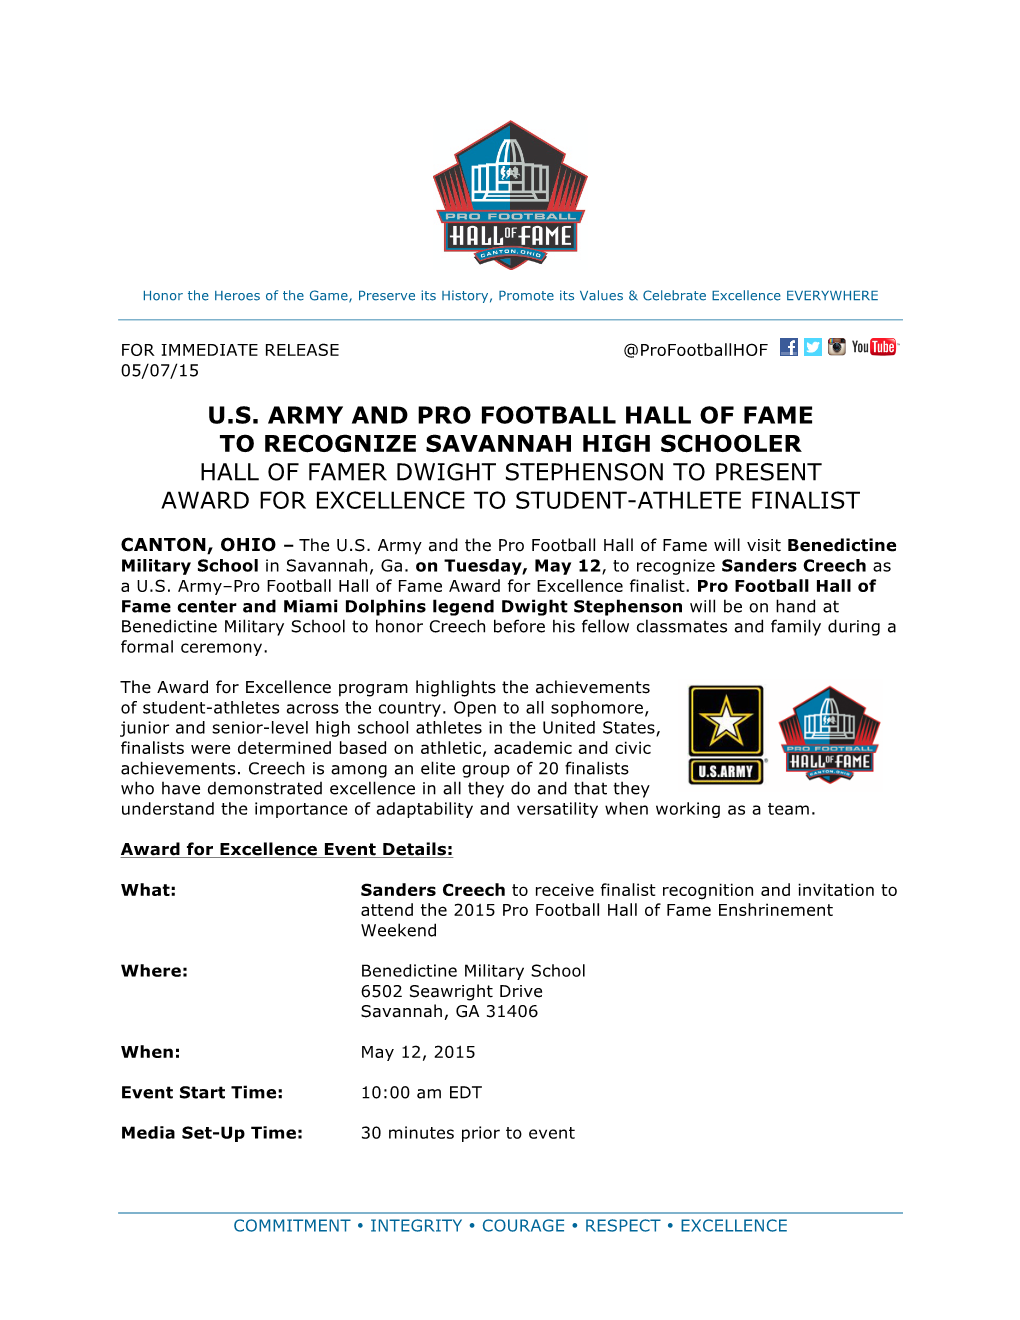 U.S. Army and Pro Football Hall of Fame to Recognize